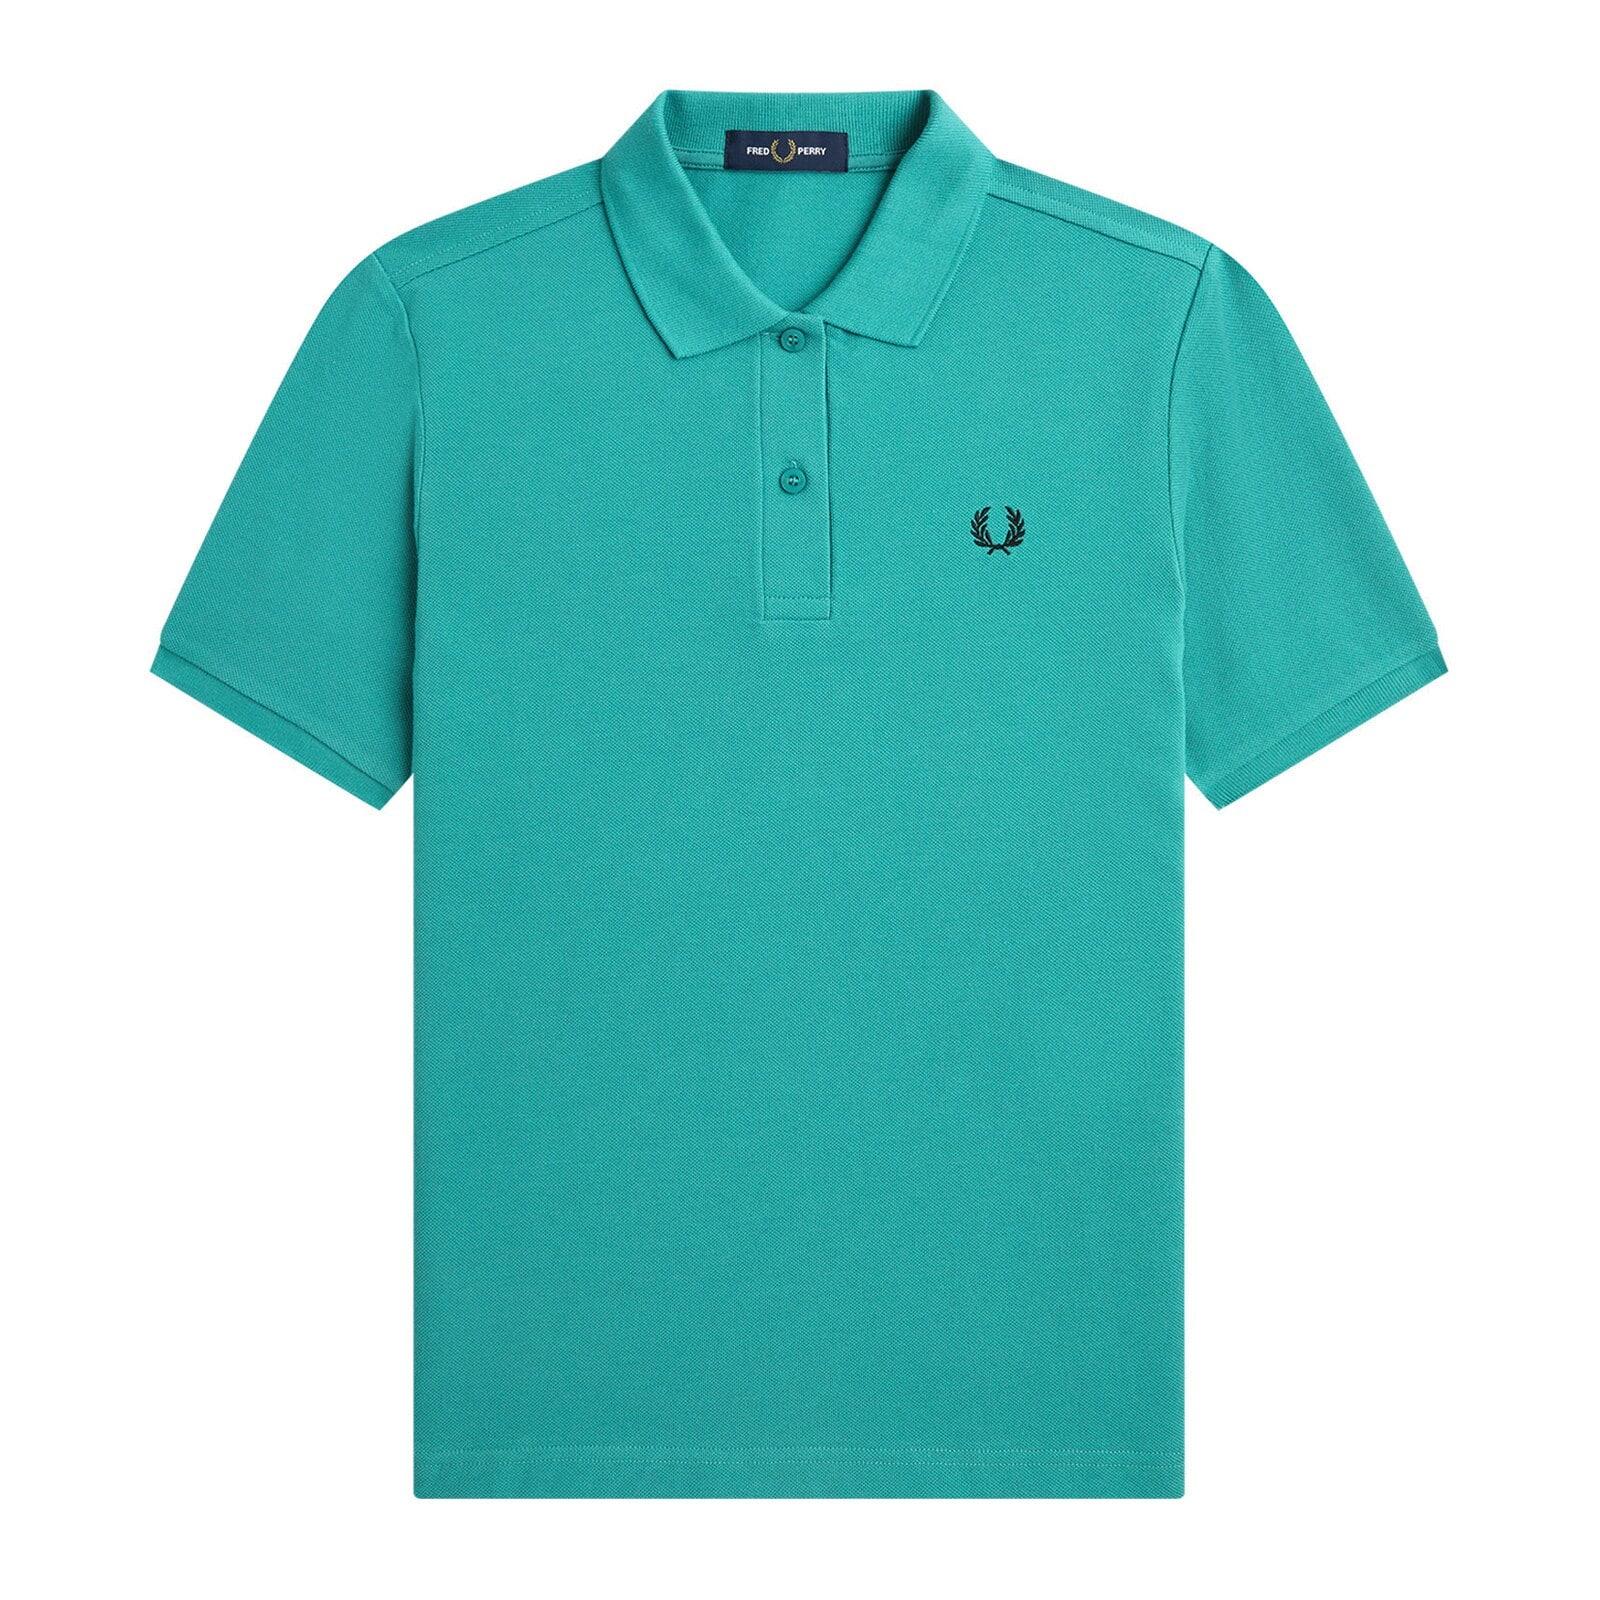 women teal solid logo polo